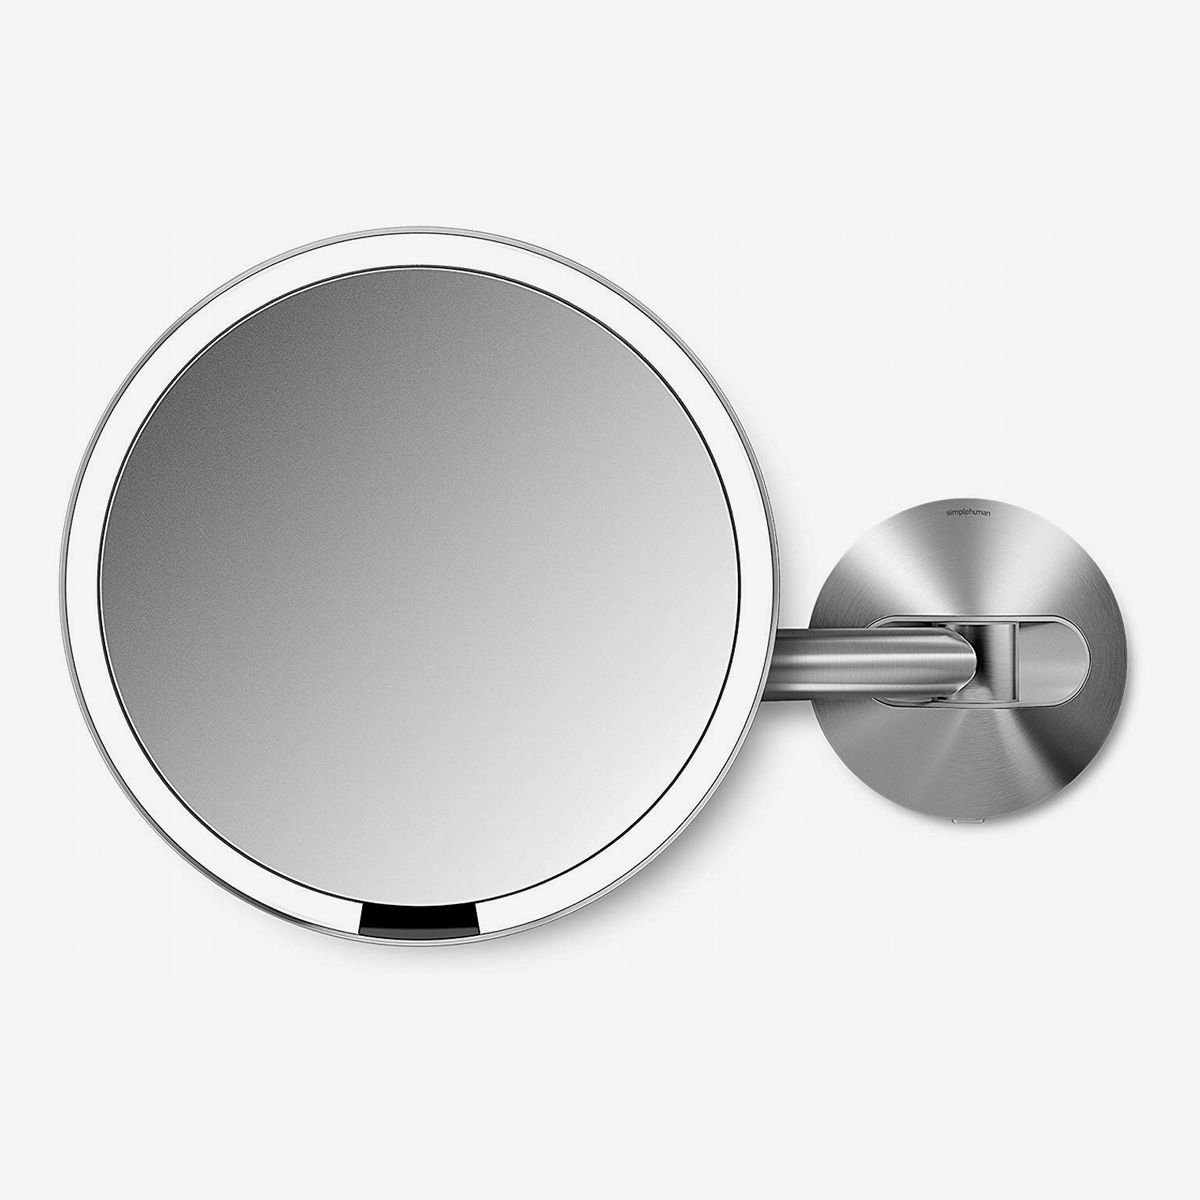 14 Best Lighted Makeup Mirrors 2022, Best Lighted Makeup Mirror Plug In